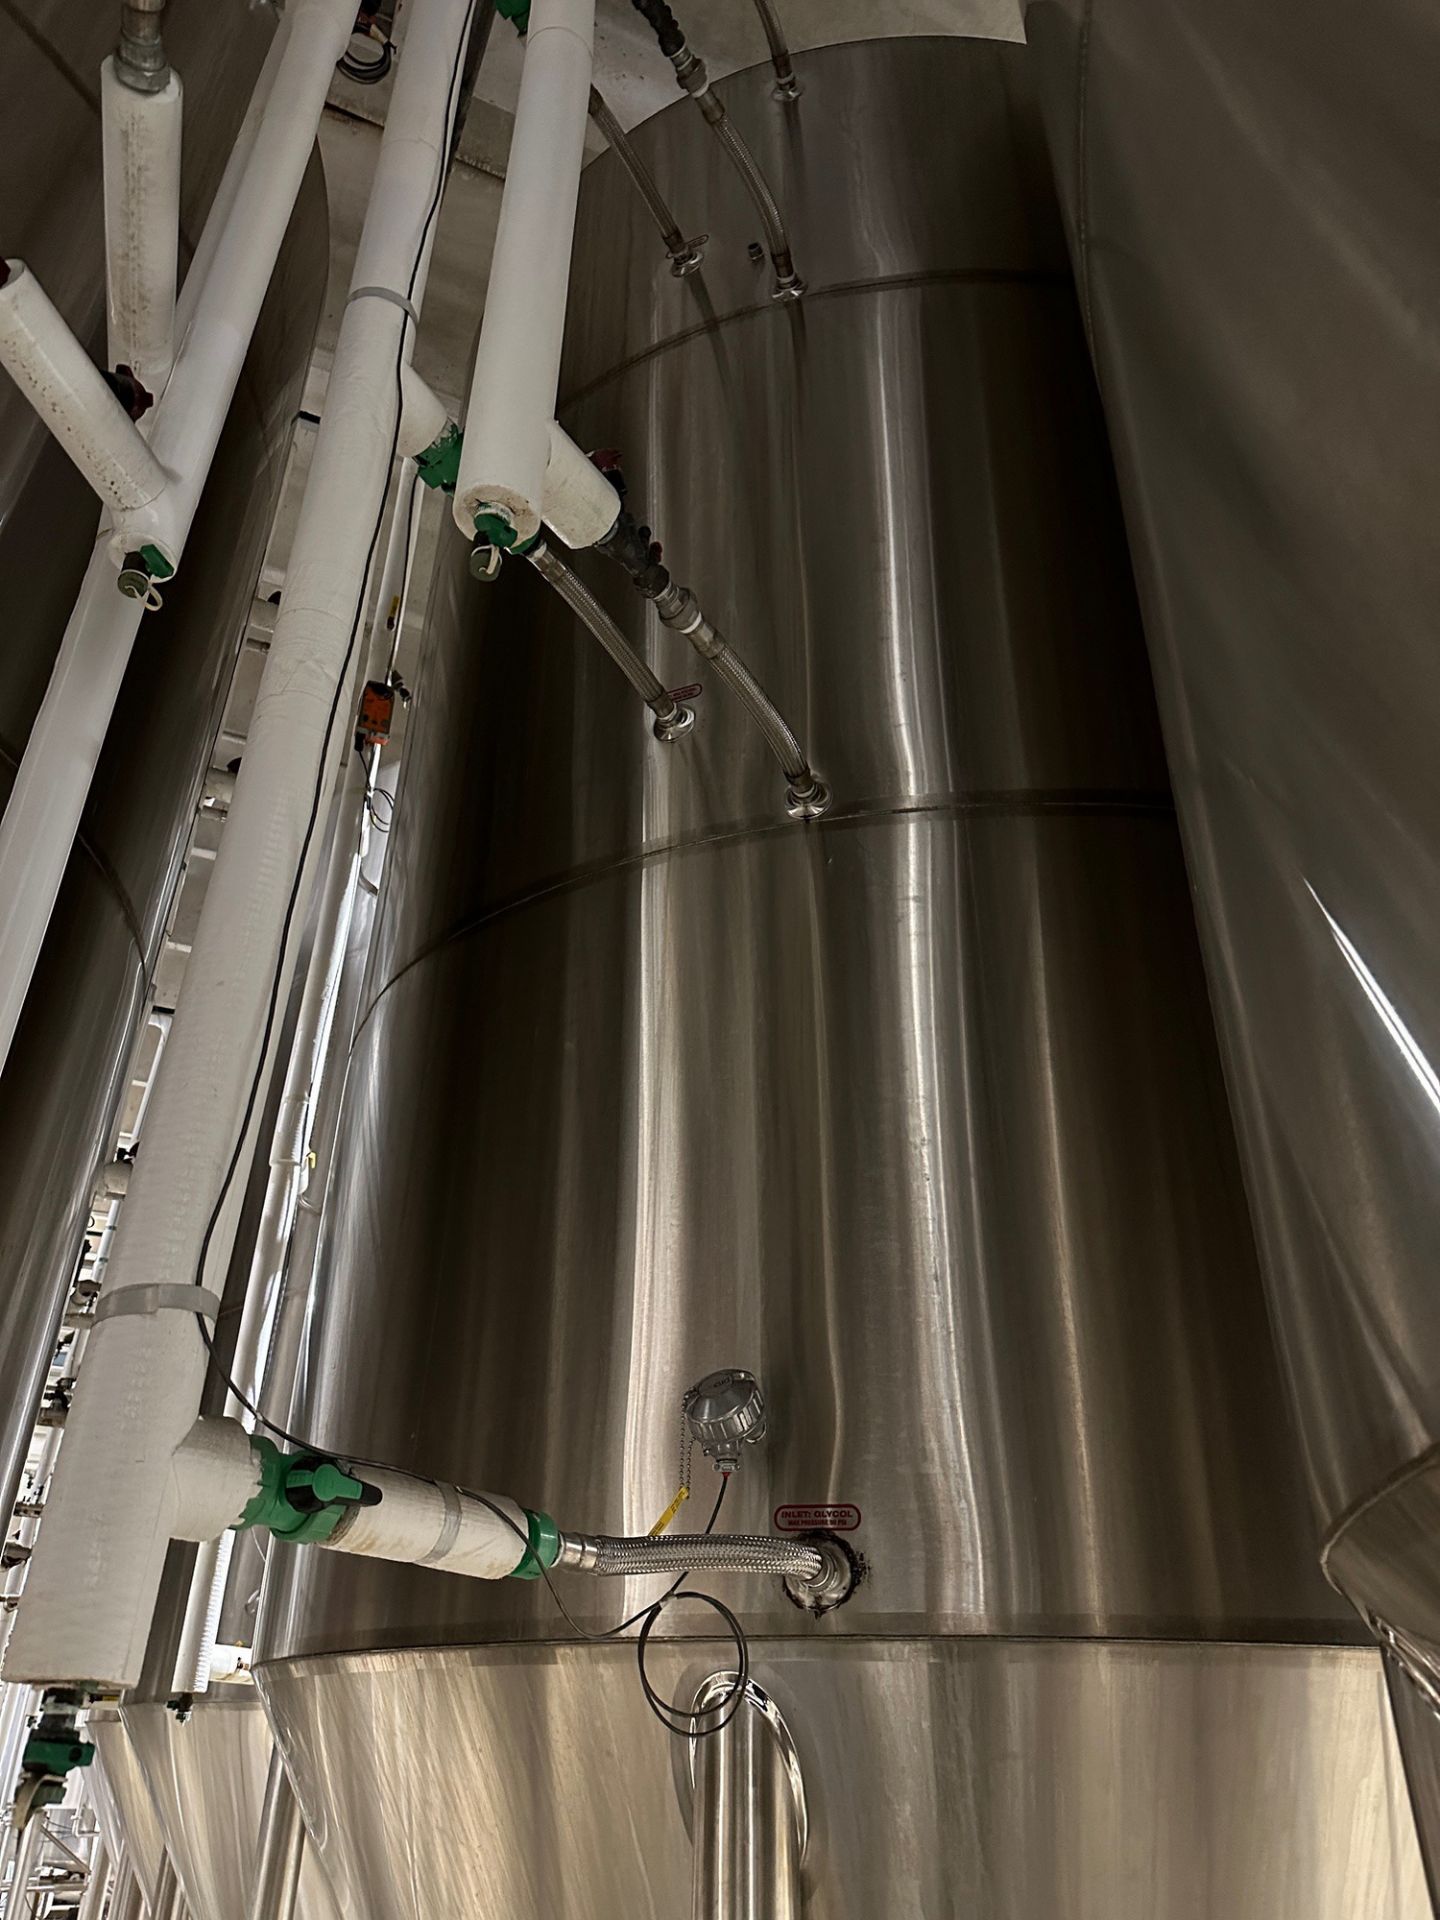 Silver State Stainless 120 BBL Stainless Steel Fermentation Tank - Cone Bottom, Gly | Rig Fee $2150 - Image 4 of 6